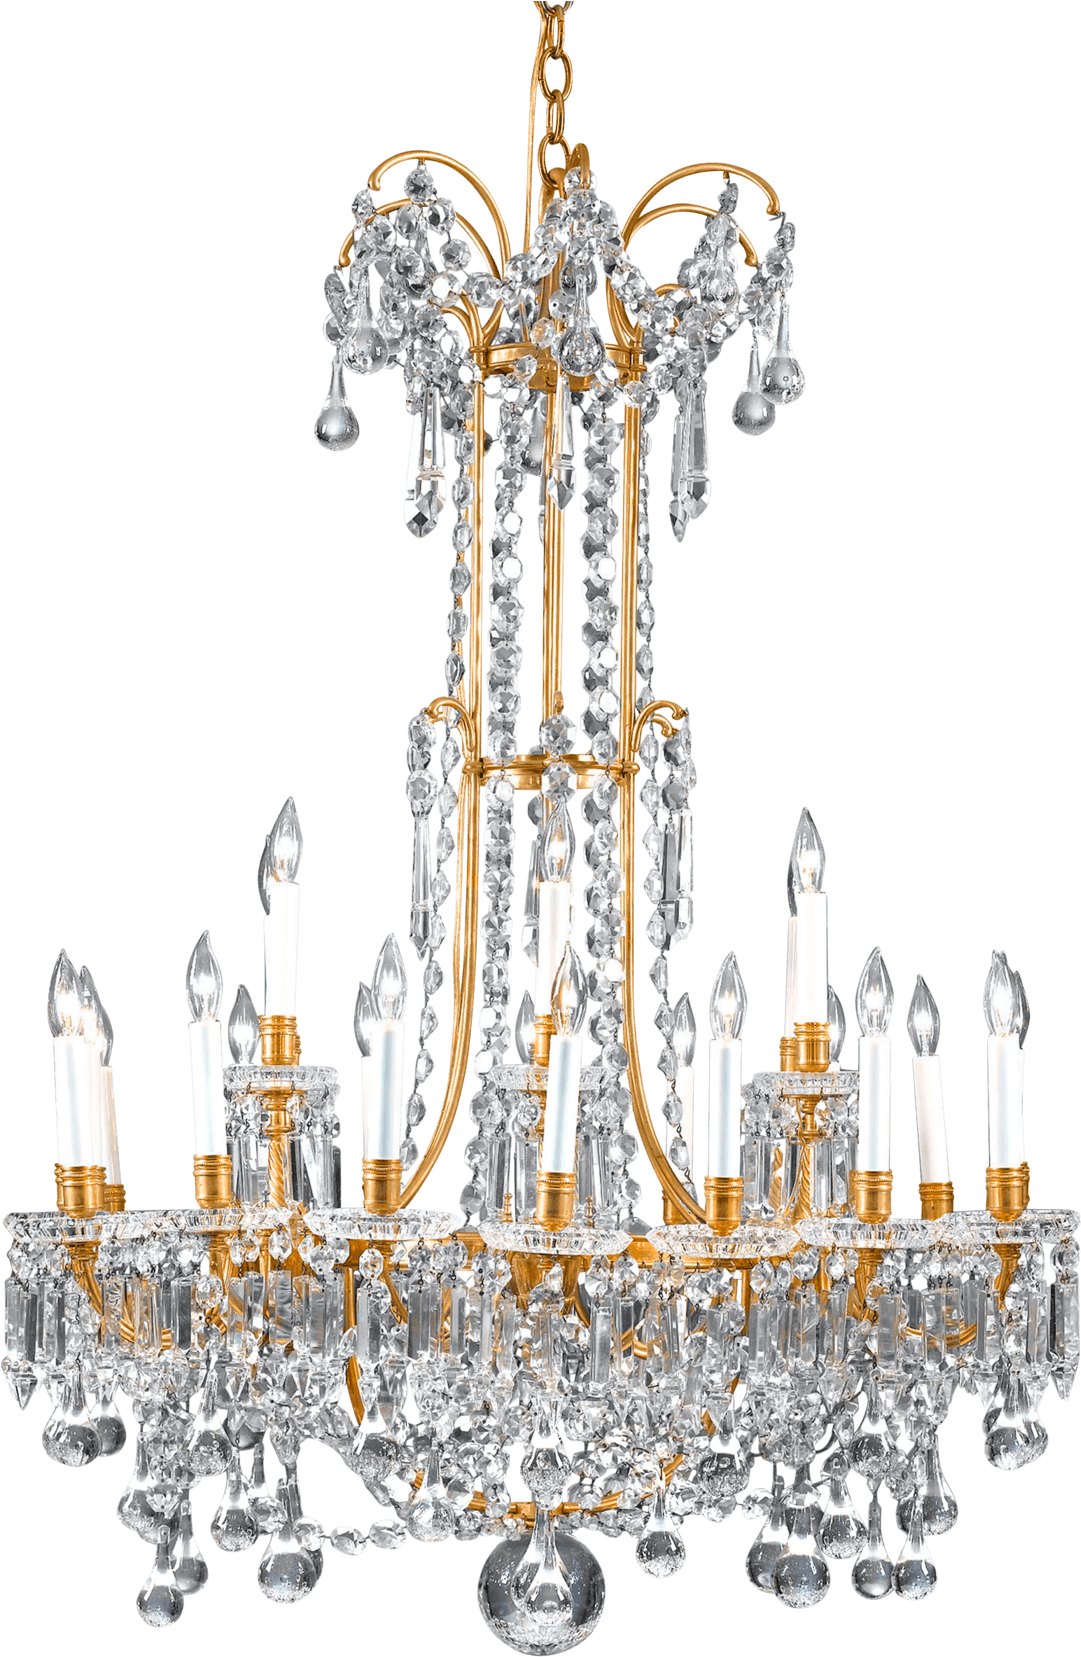 A Chandelier With Crystal Lights